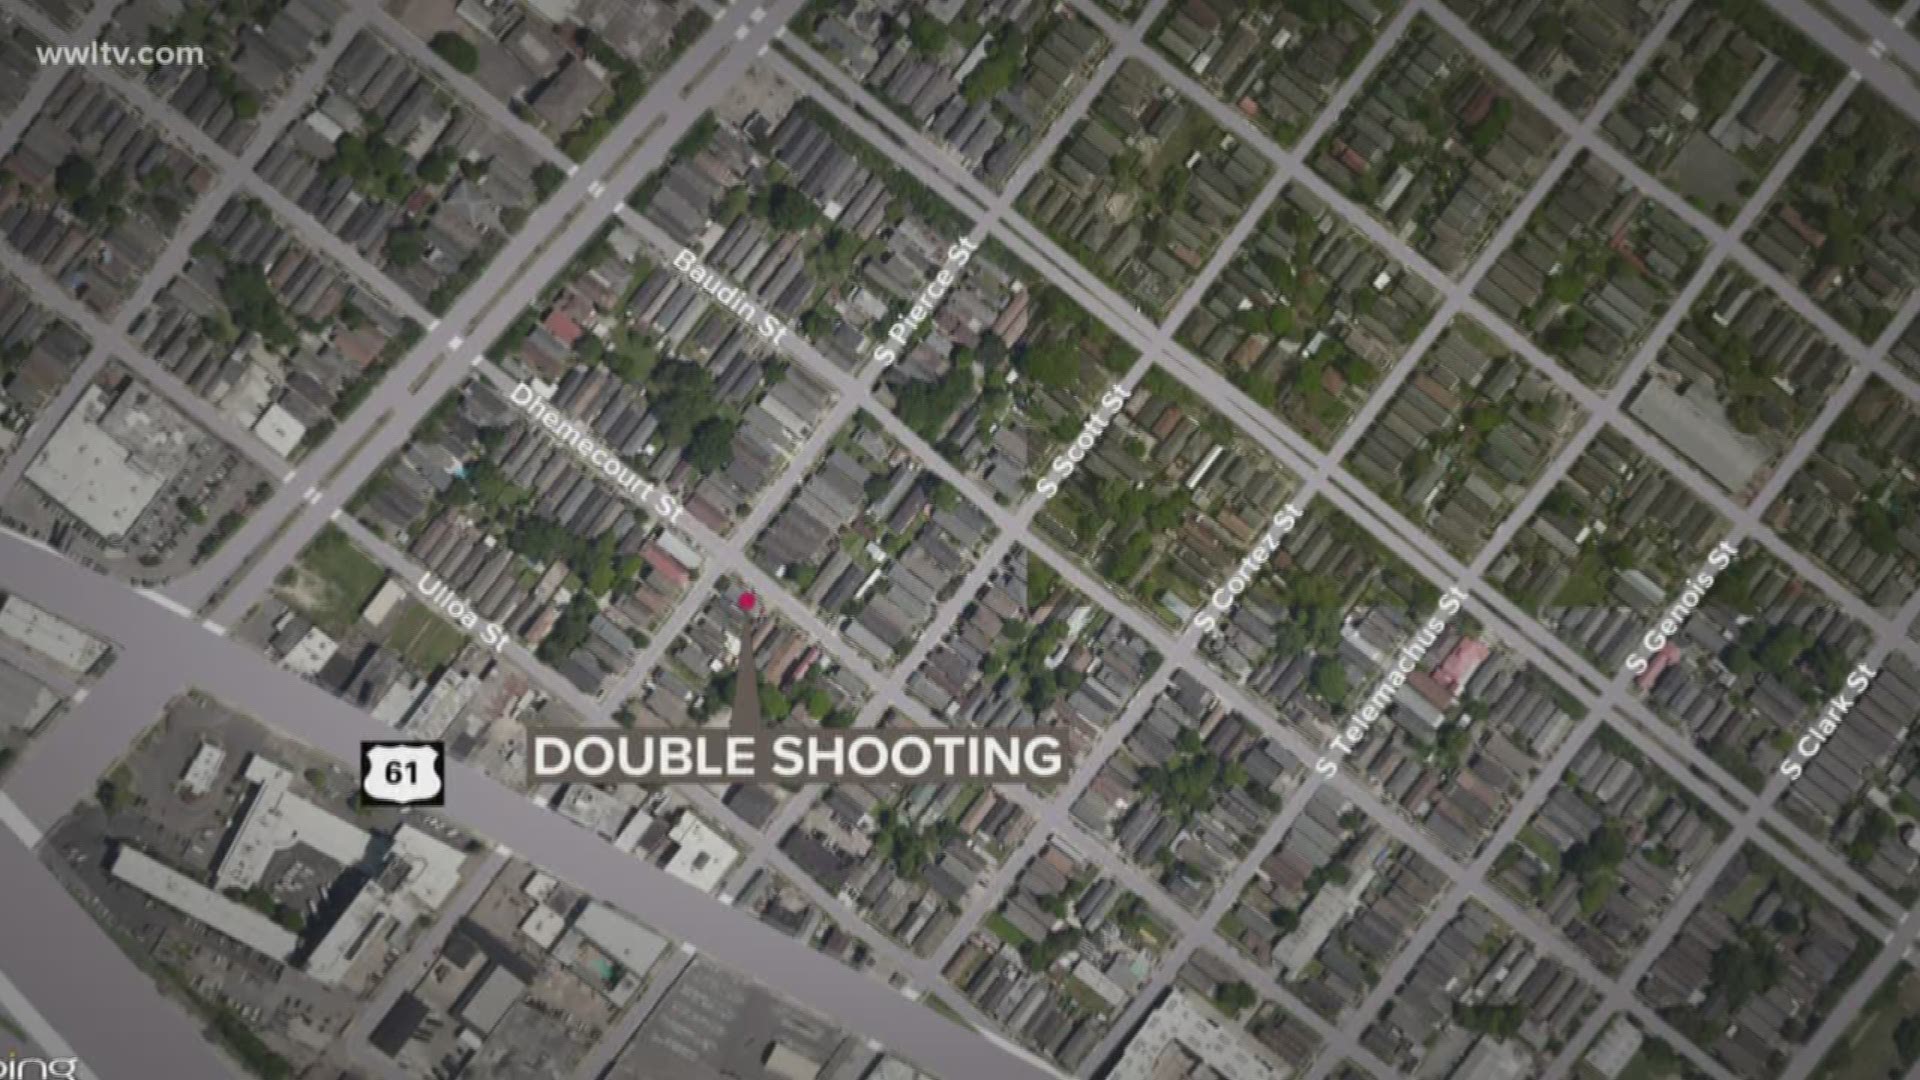 The NOPD says the shooting happened around 12:30 a.m. Saturday off S. Carrollton Avenue.